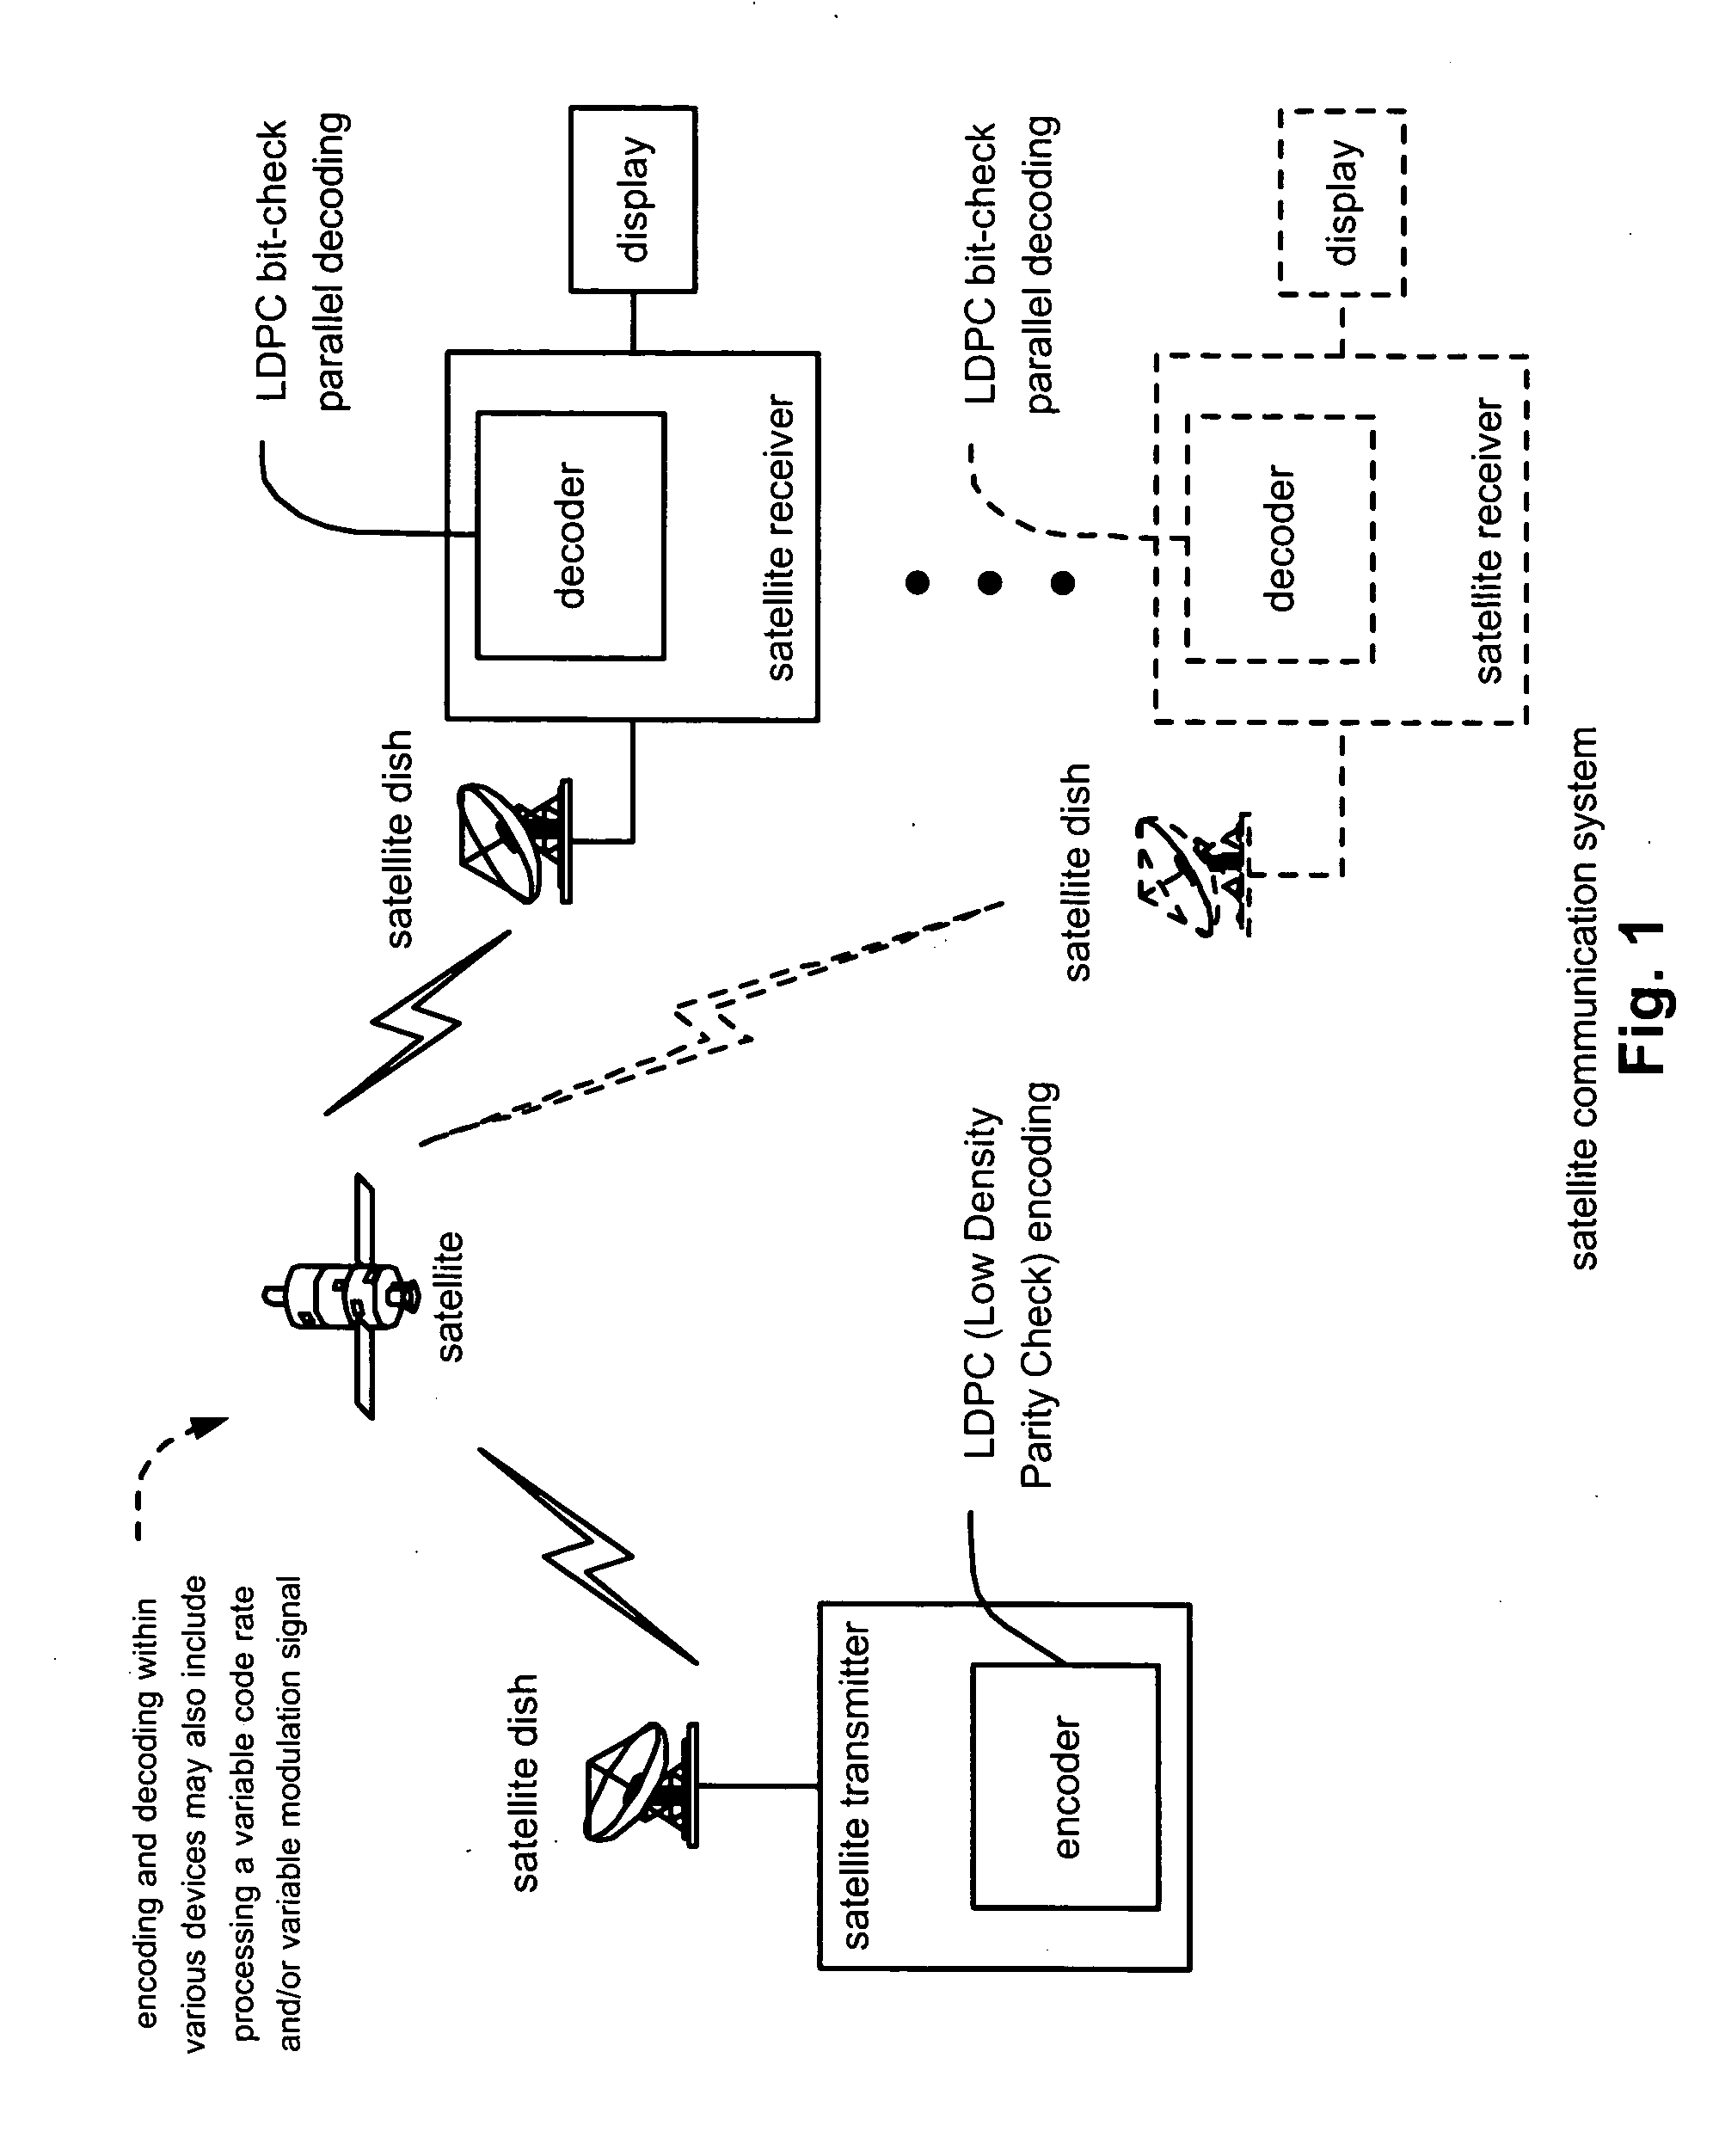 LDPC (Low Density Parity Check) coded signal decoding using parallel and simultaneous bit node and check node processing